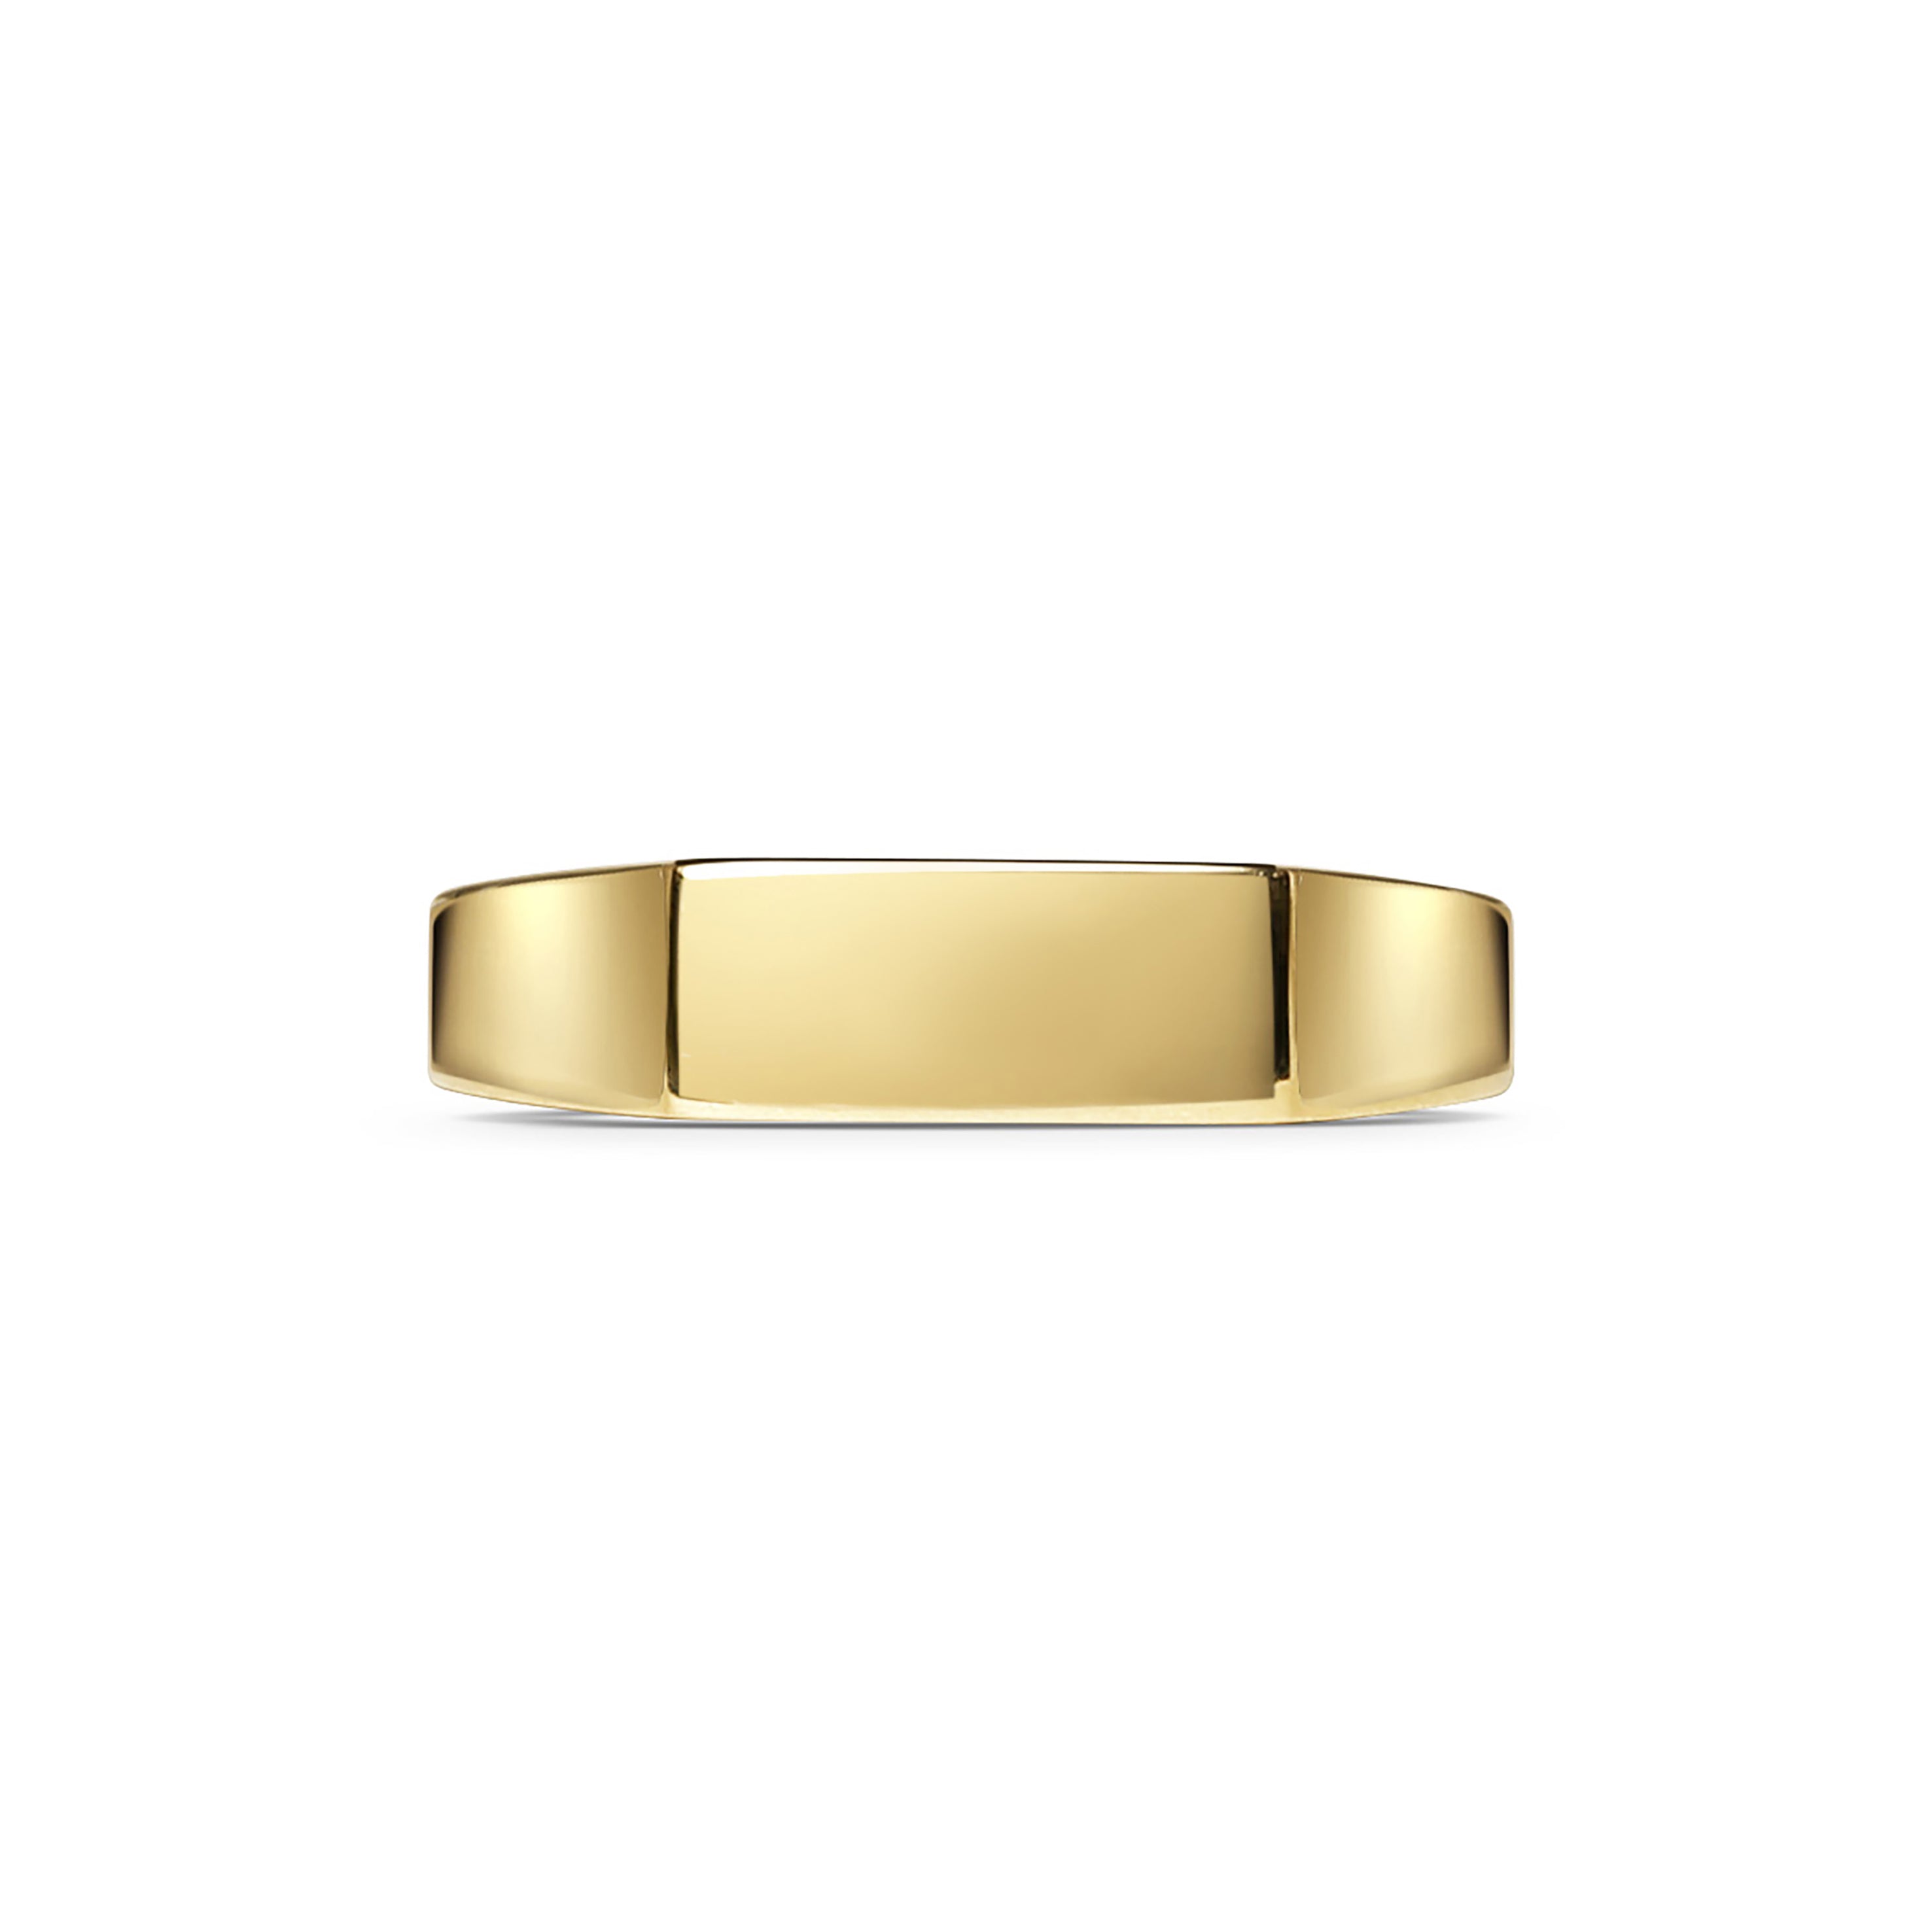 The Rectangular Signet Ring by East London jeweller Rachel Boston | Discover our collections of unique and timeless engagement rings, wedding rings, and modern fine jewellery.